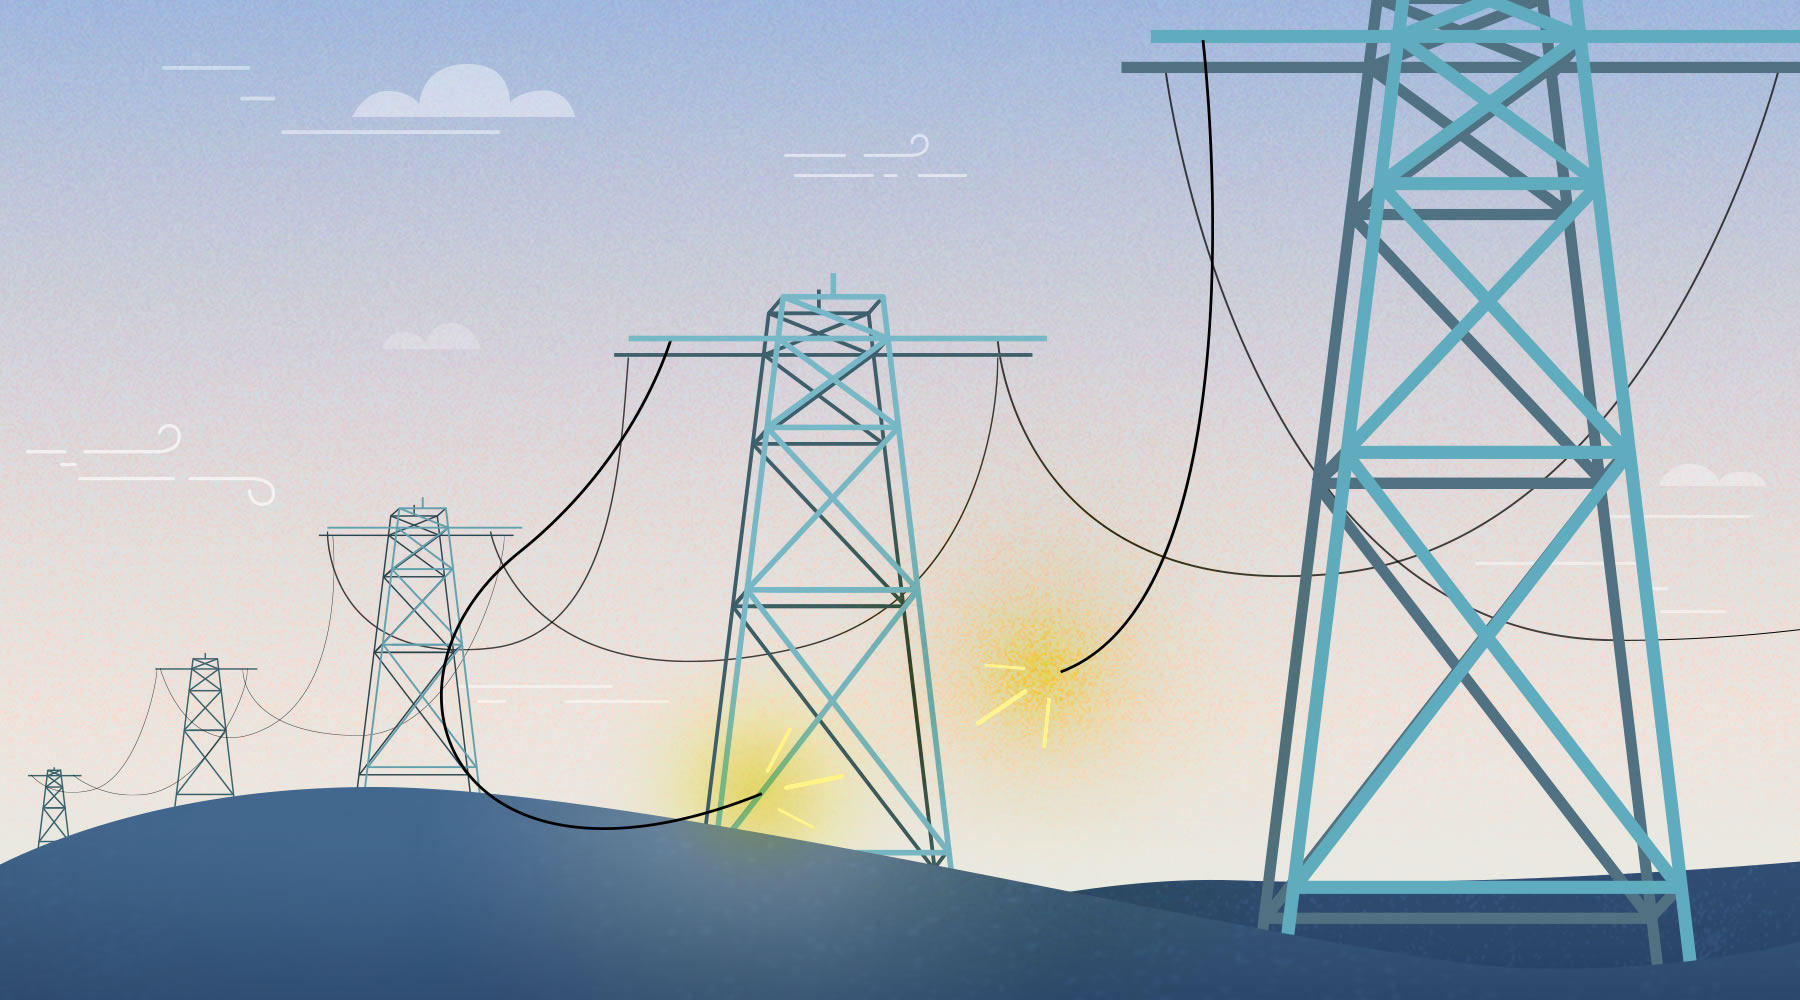 Broken transmission lines often lead to power outages.